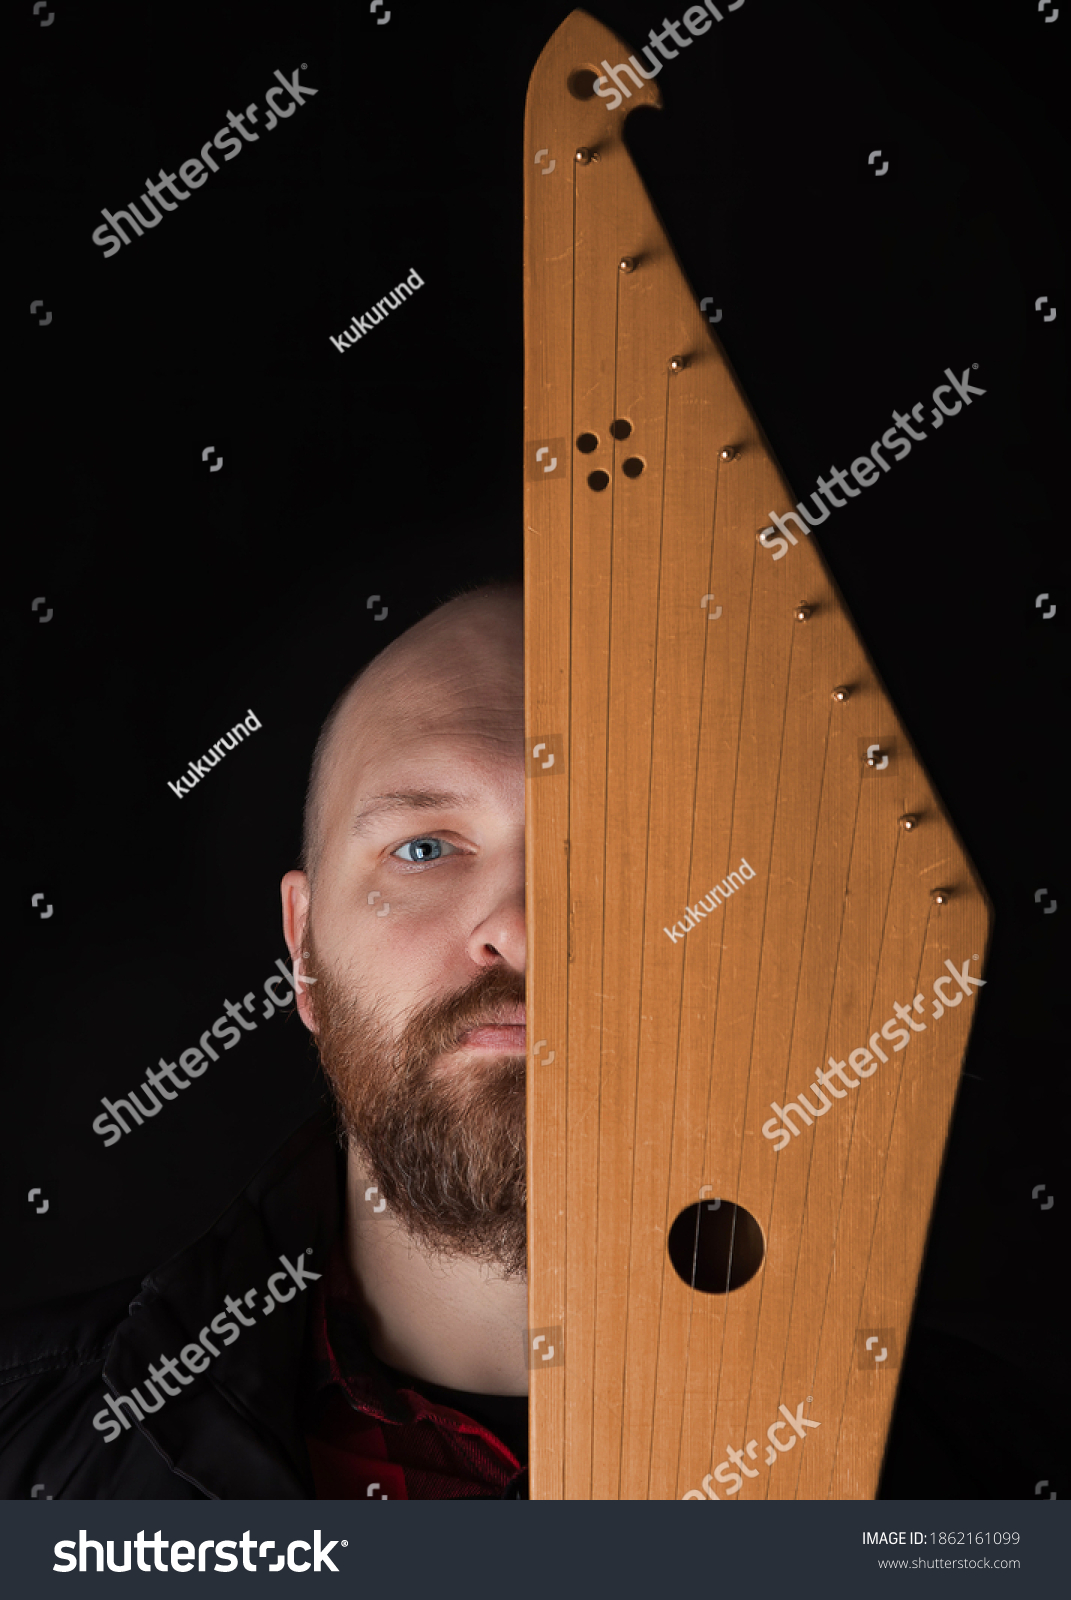 Bearded man hides his face behind Kantele, a national Finnish and Karelian musical instrument, also known as the psaltery (gusli) in Russia and as the kankles, kokle, and Kannel in the Baltic States. #1862161099